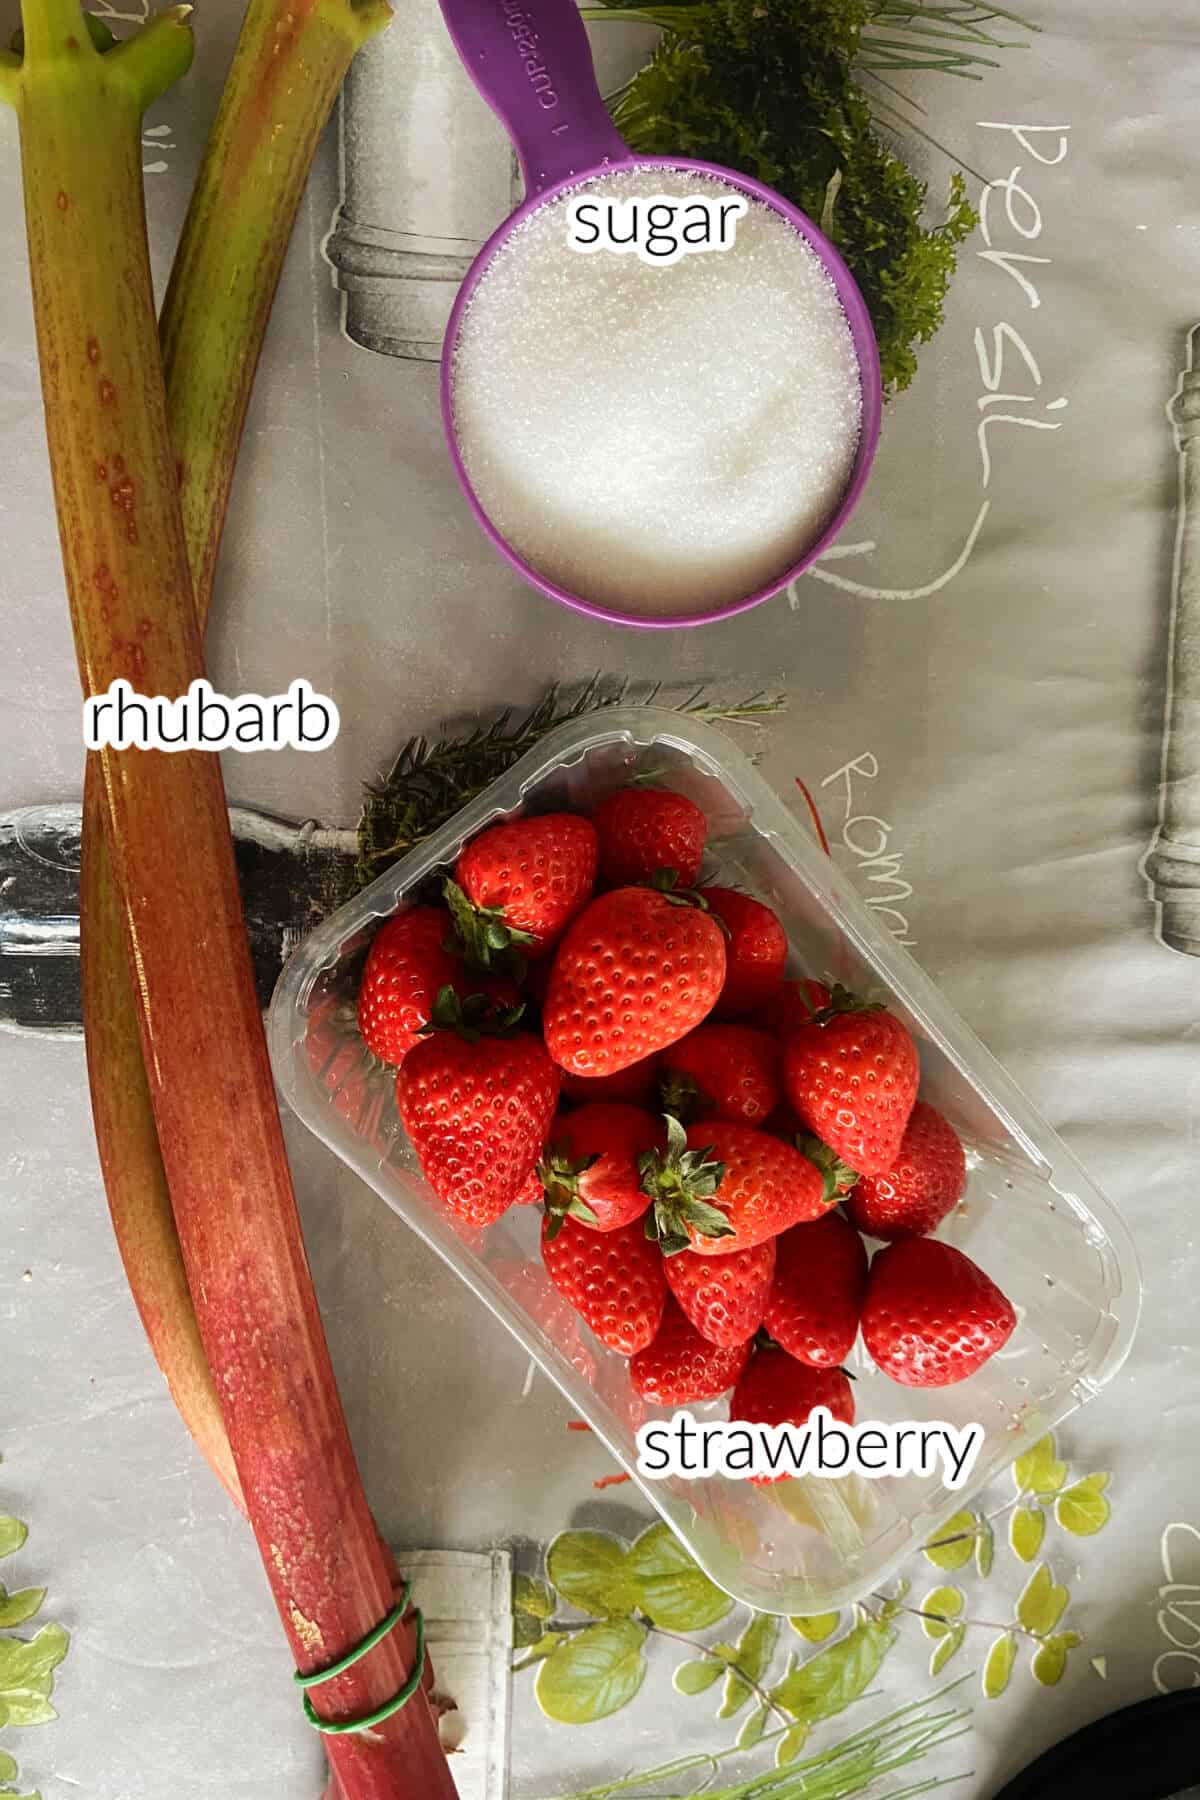 Ingredients used to make strawberry and rhubarb jam.